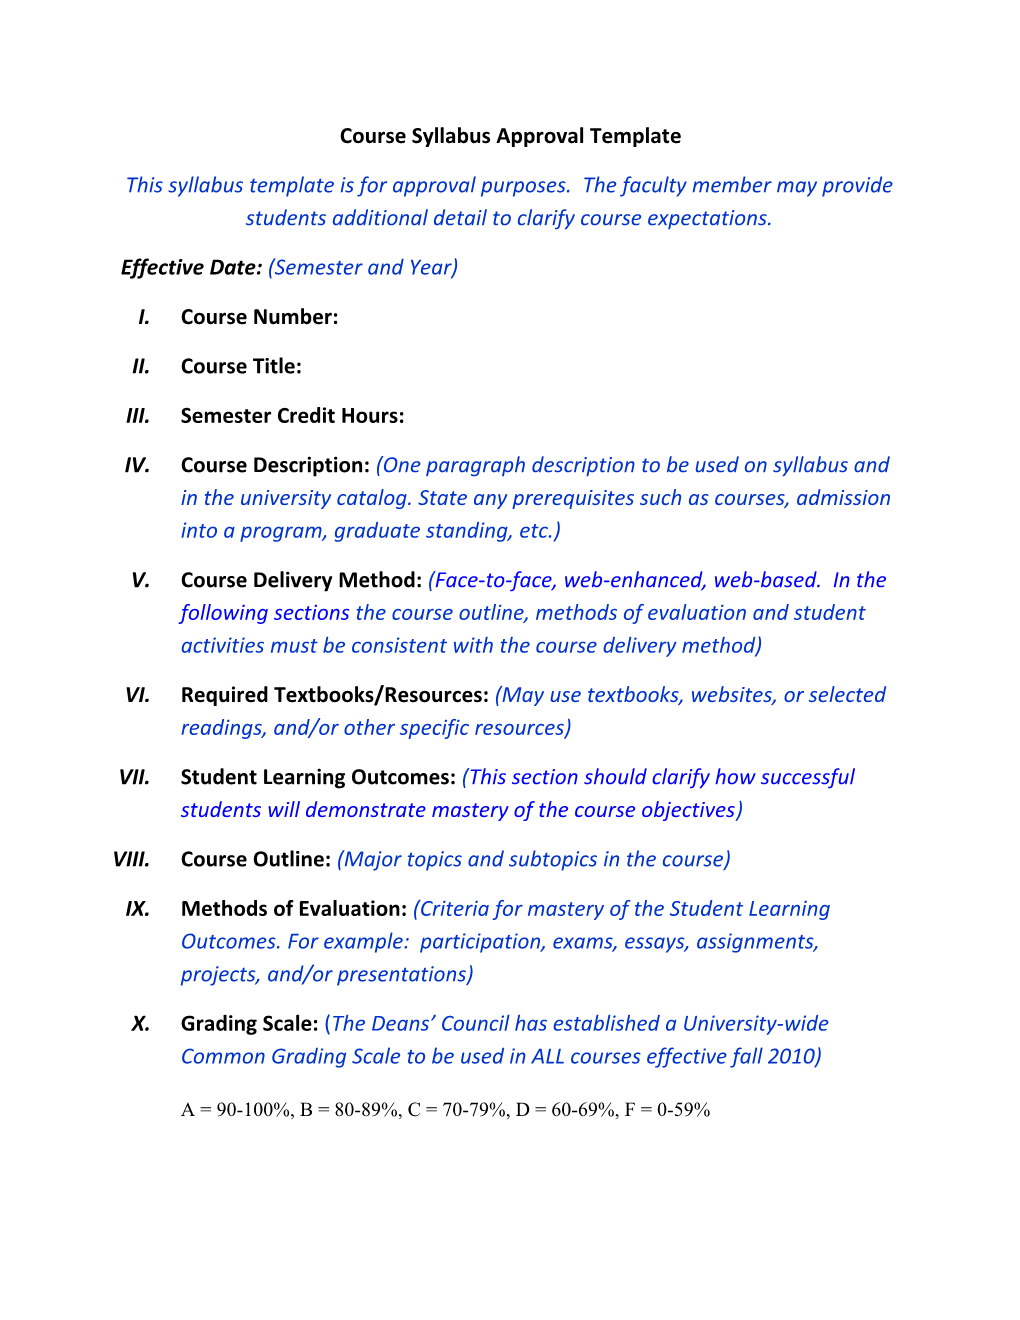 Course Syllabus Approval Template